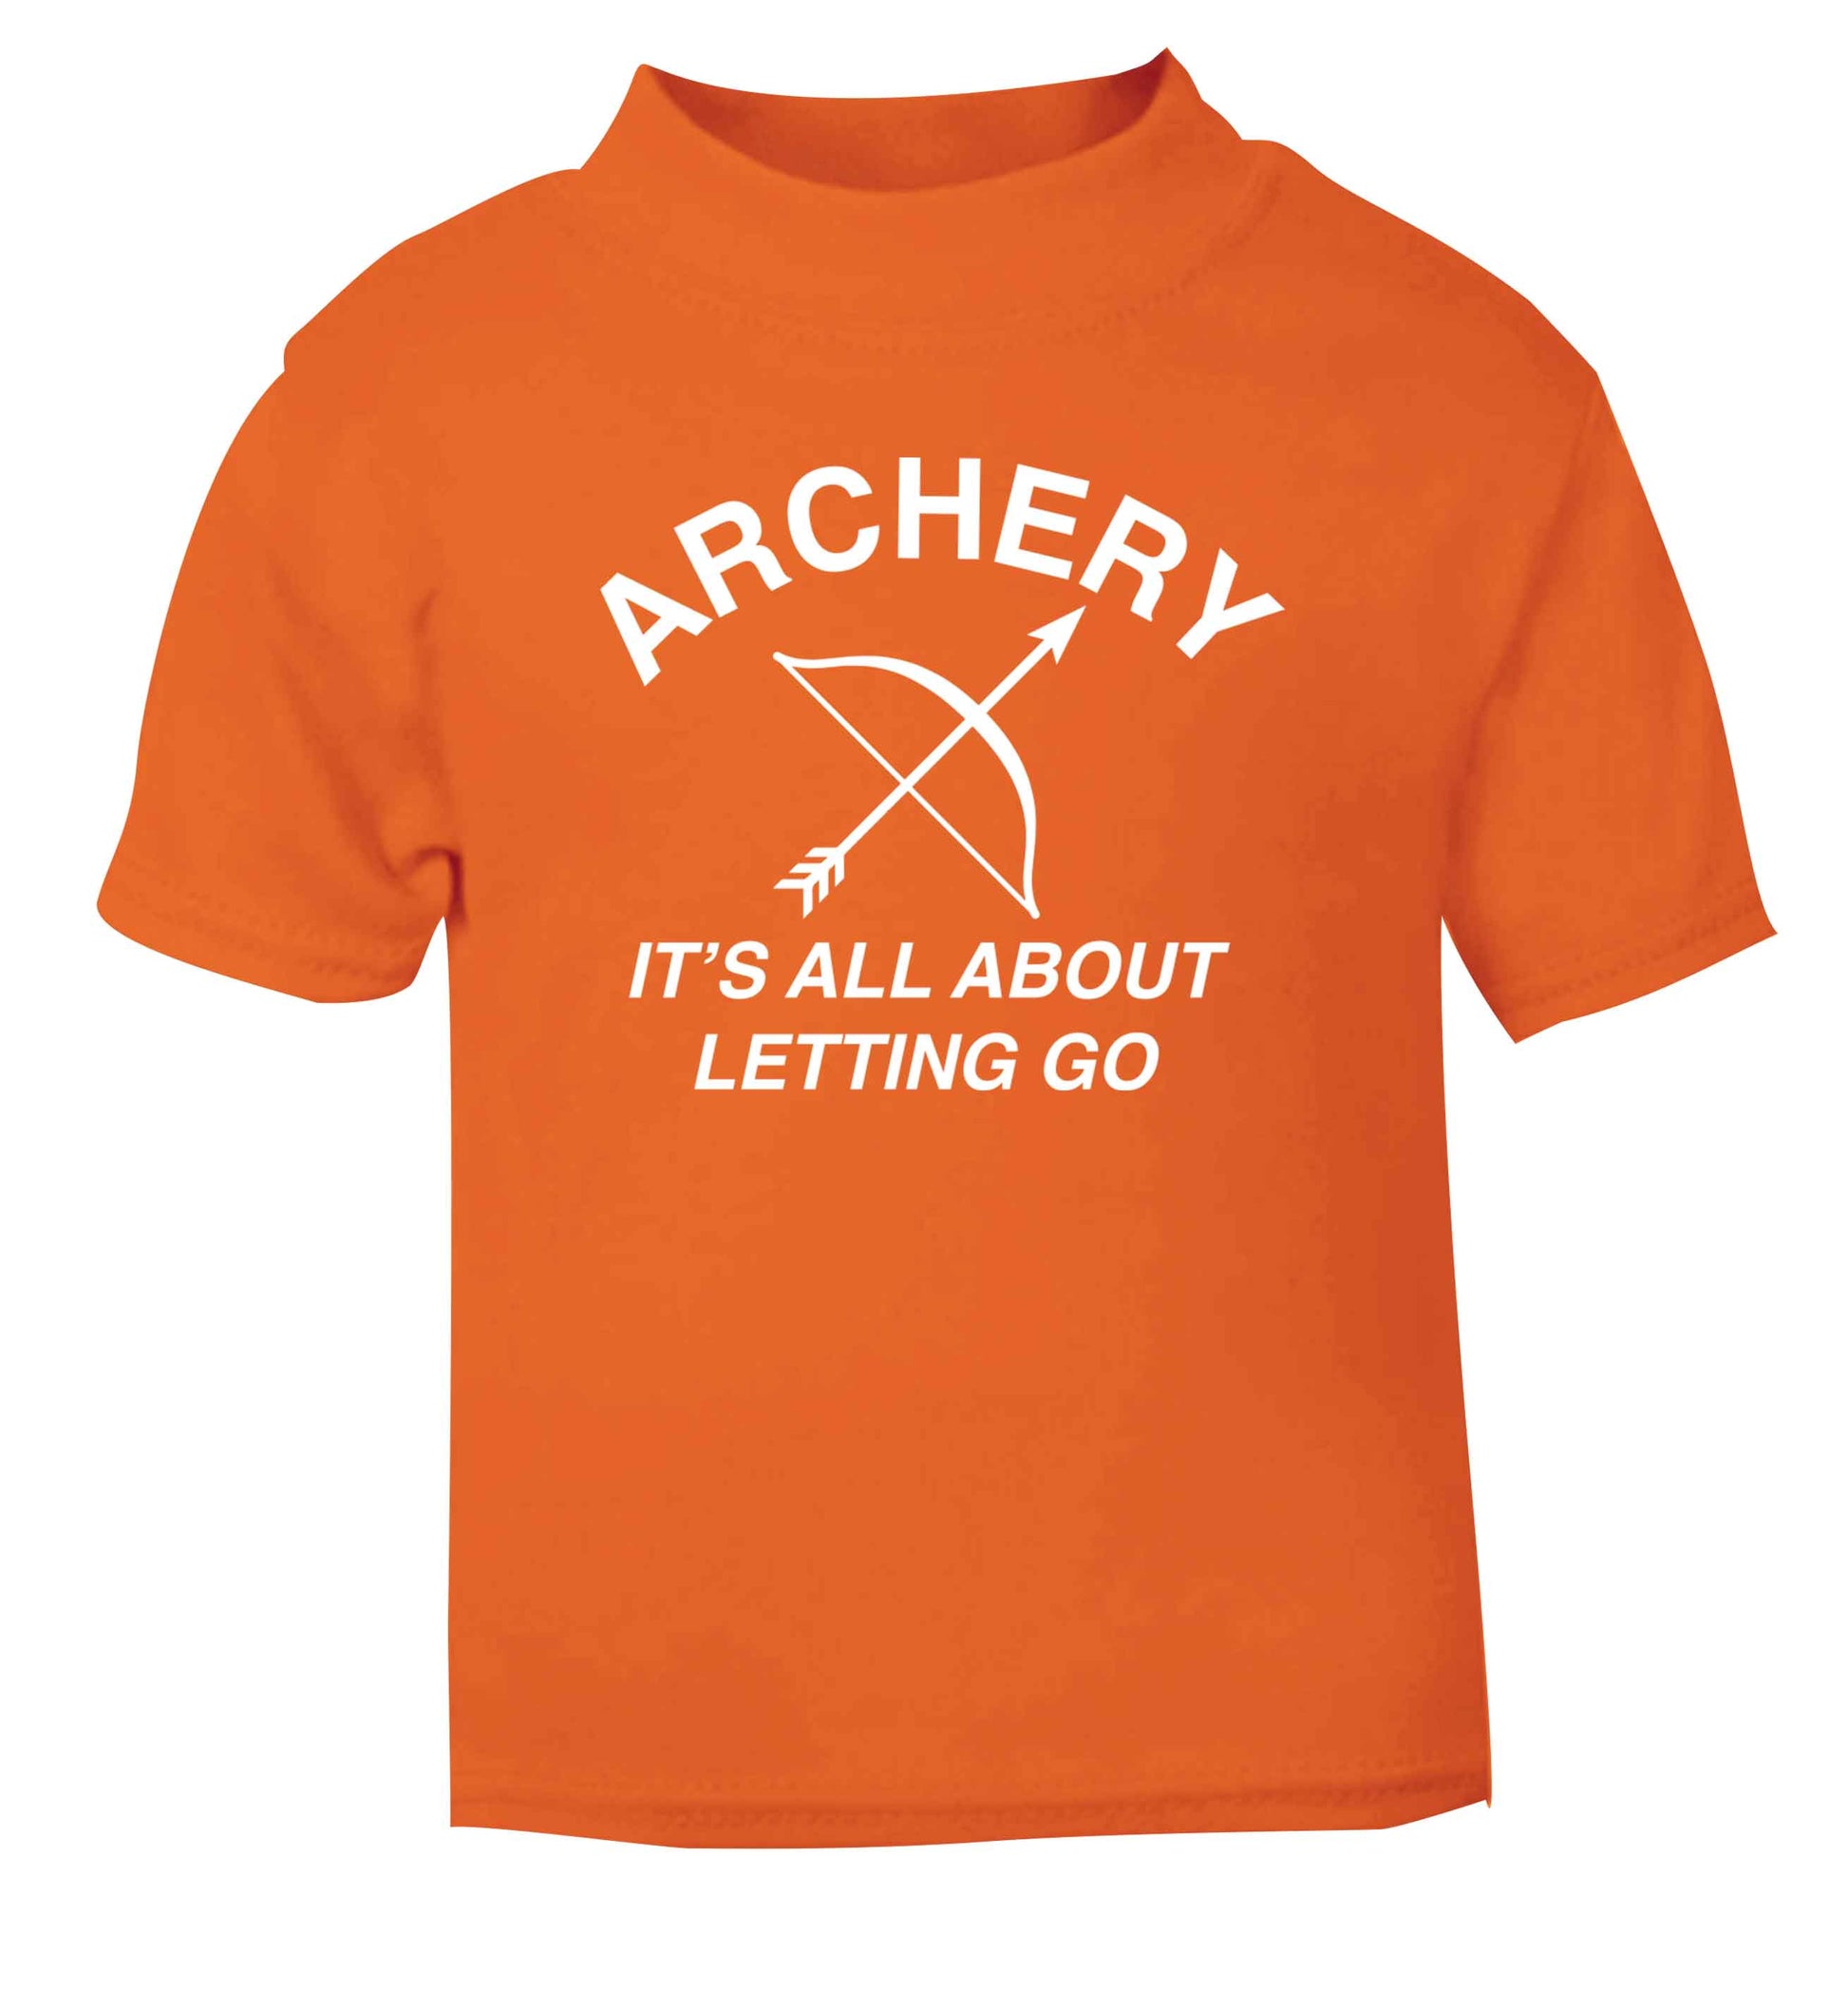 Archery it's all about letting go orange Baby Toddler Tshirt 2 Years